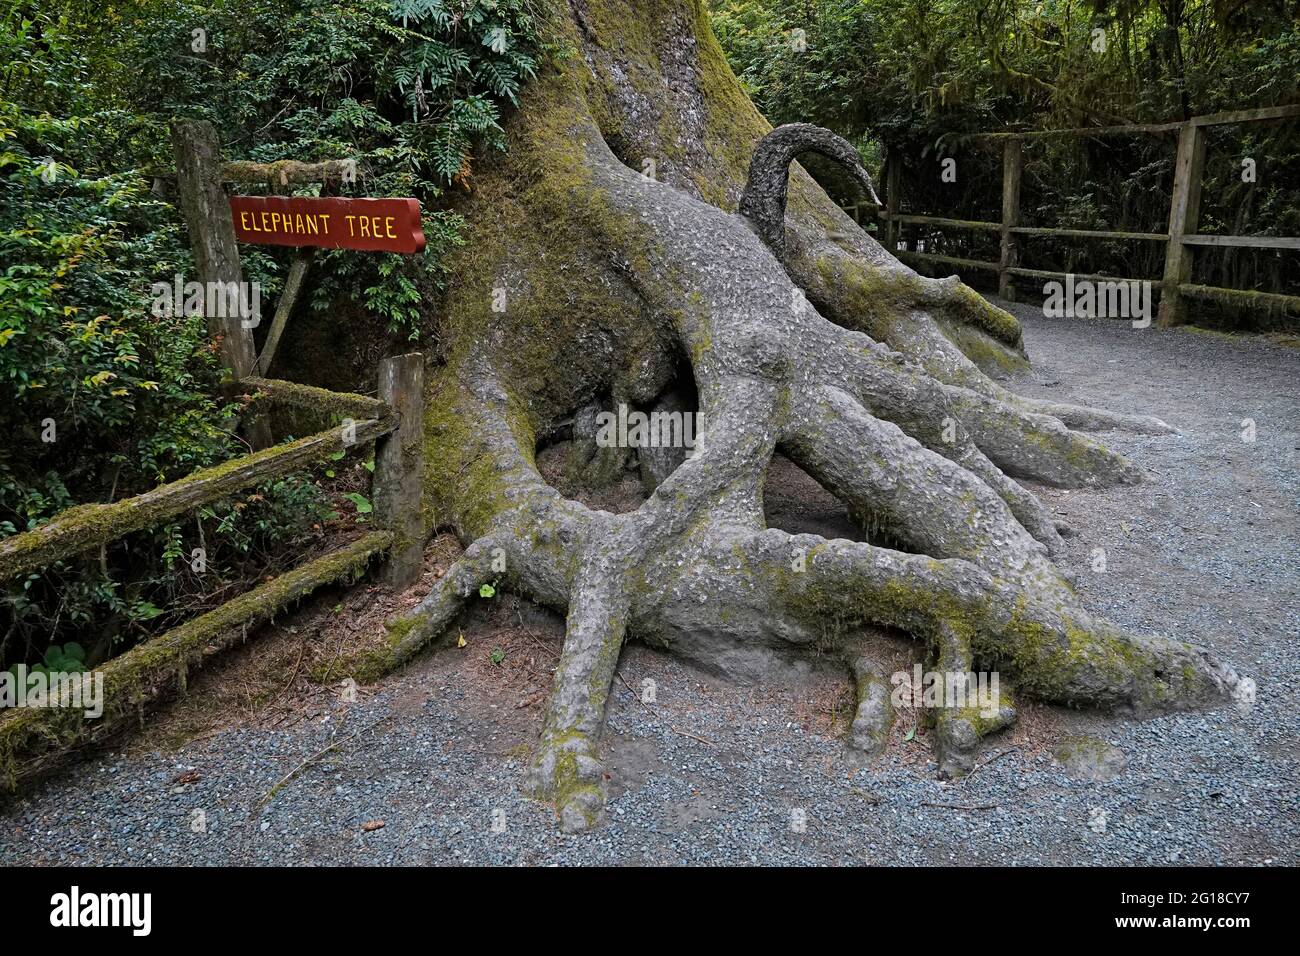 The Elephant Tree in the Trees of Mystery attraction in Klamath, California, is a giant redwood tree with mis-shapen roots. Stock Photo